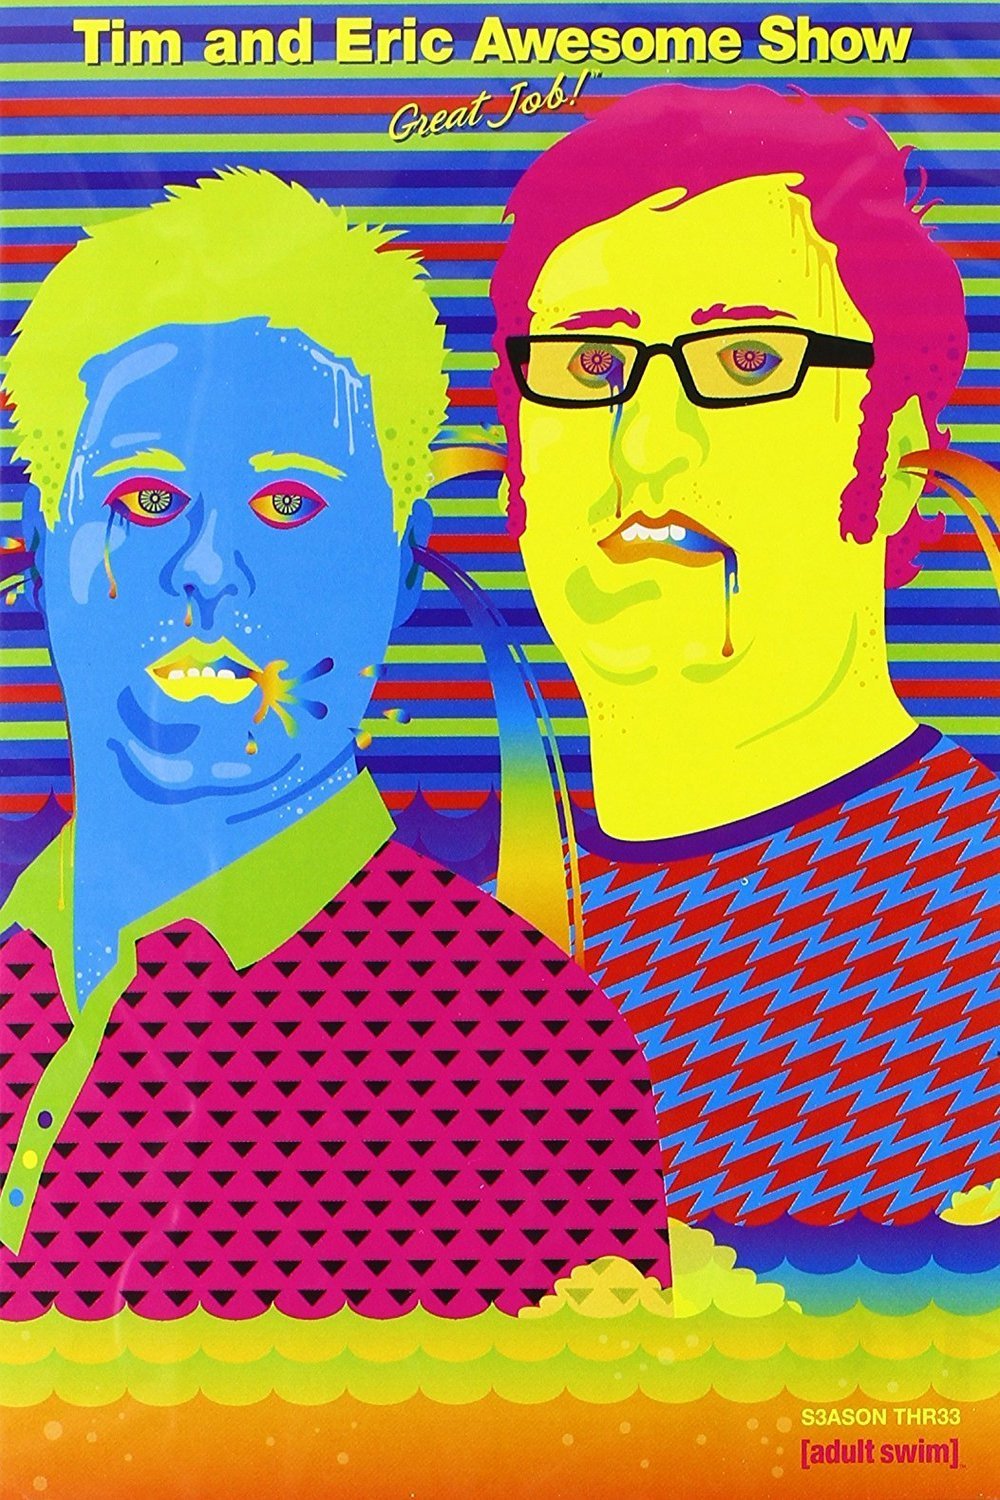 L'affiche du film Tim and Eric Awesome Show: Great Job!